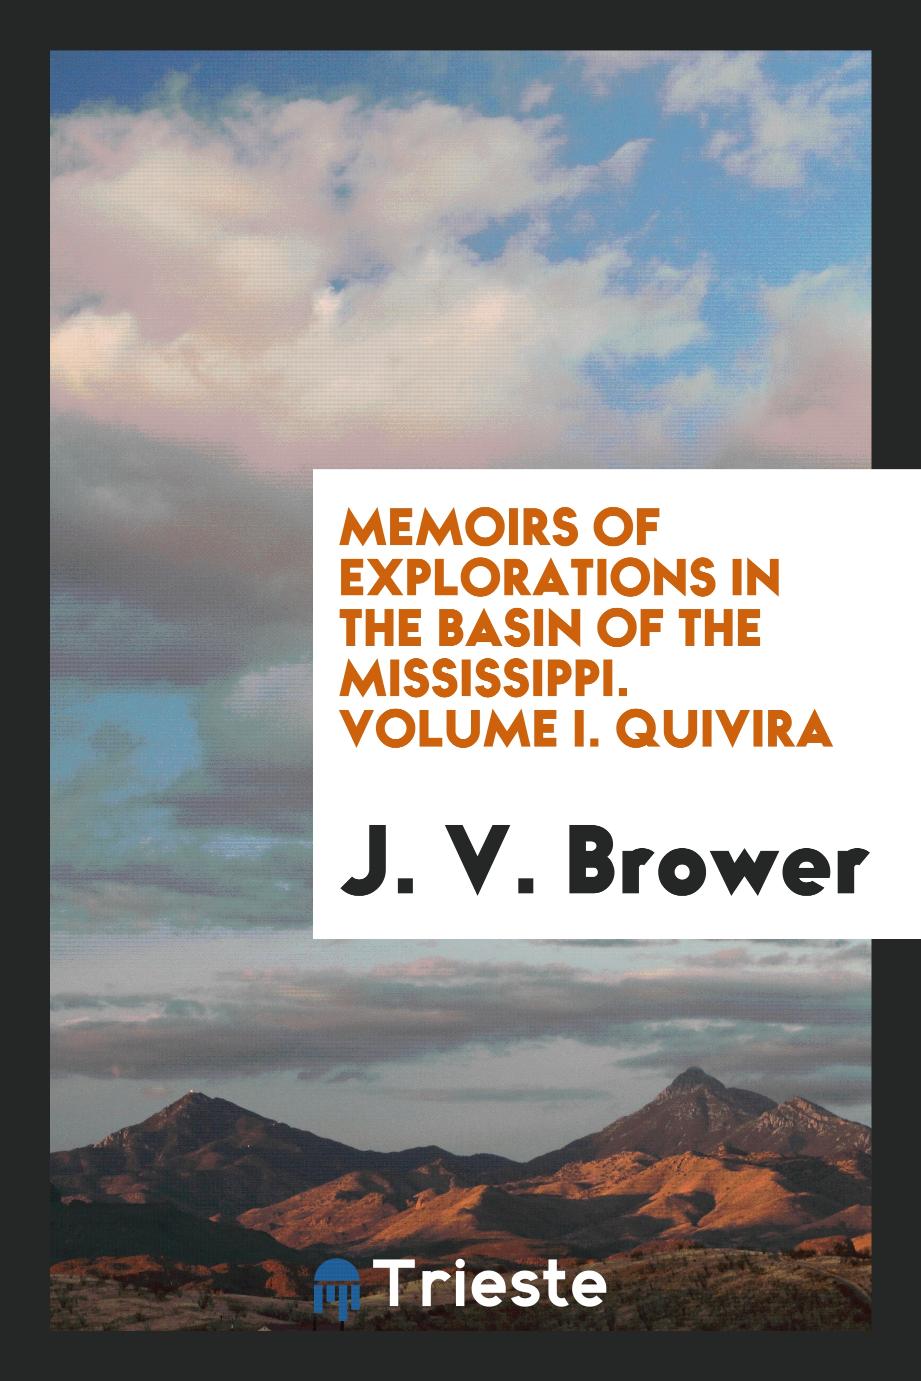 Memoirs of Explorations in the Basin of the Mississippi. Volume I. Quivira